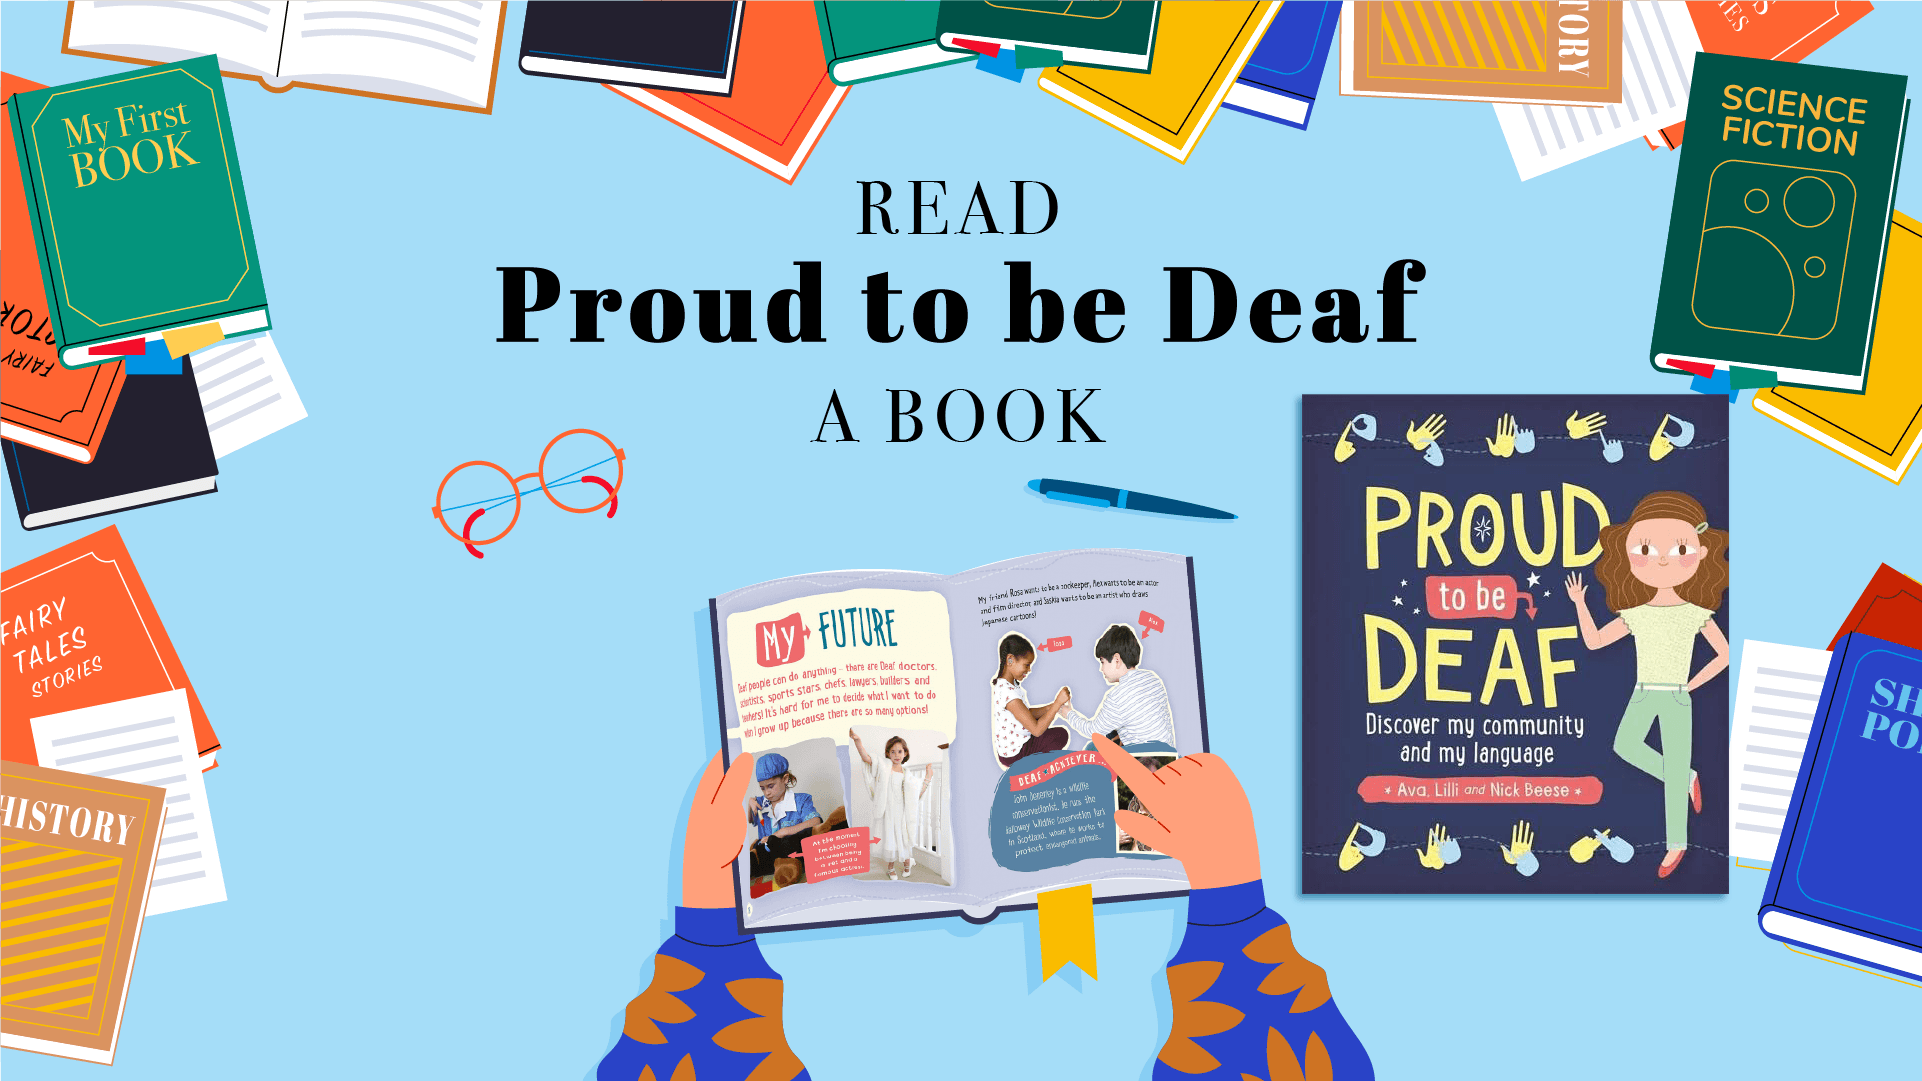 Books border, headline- first line: READ second line: Proud to be Deaf third line: A BOOK graphics of orange glasses, blue pen, a person opening a book and point at the two spread pages from Proud to be Deaf. The cover of "Proud to be Deaf" on right side.